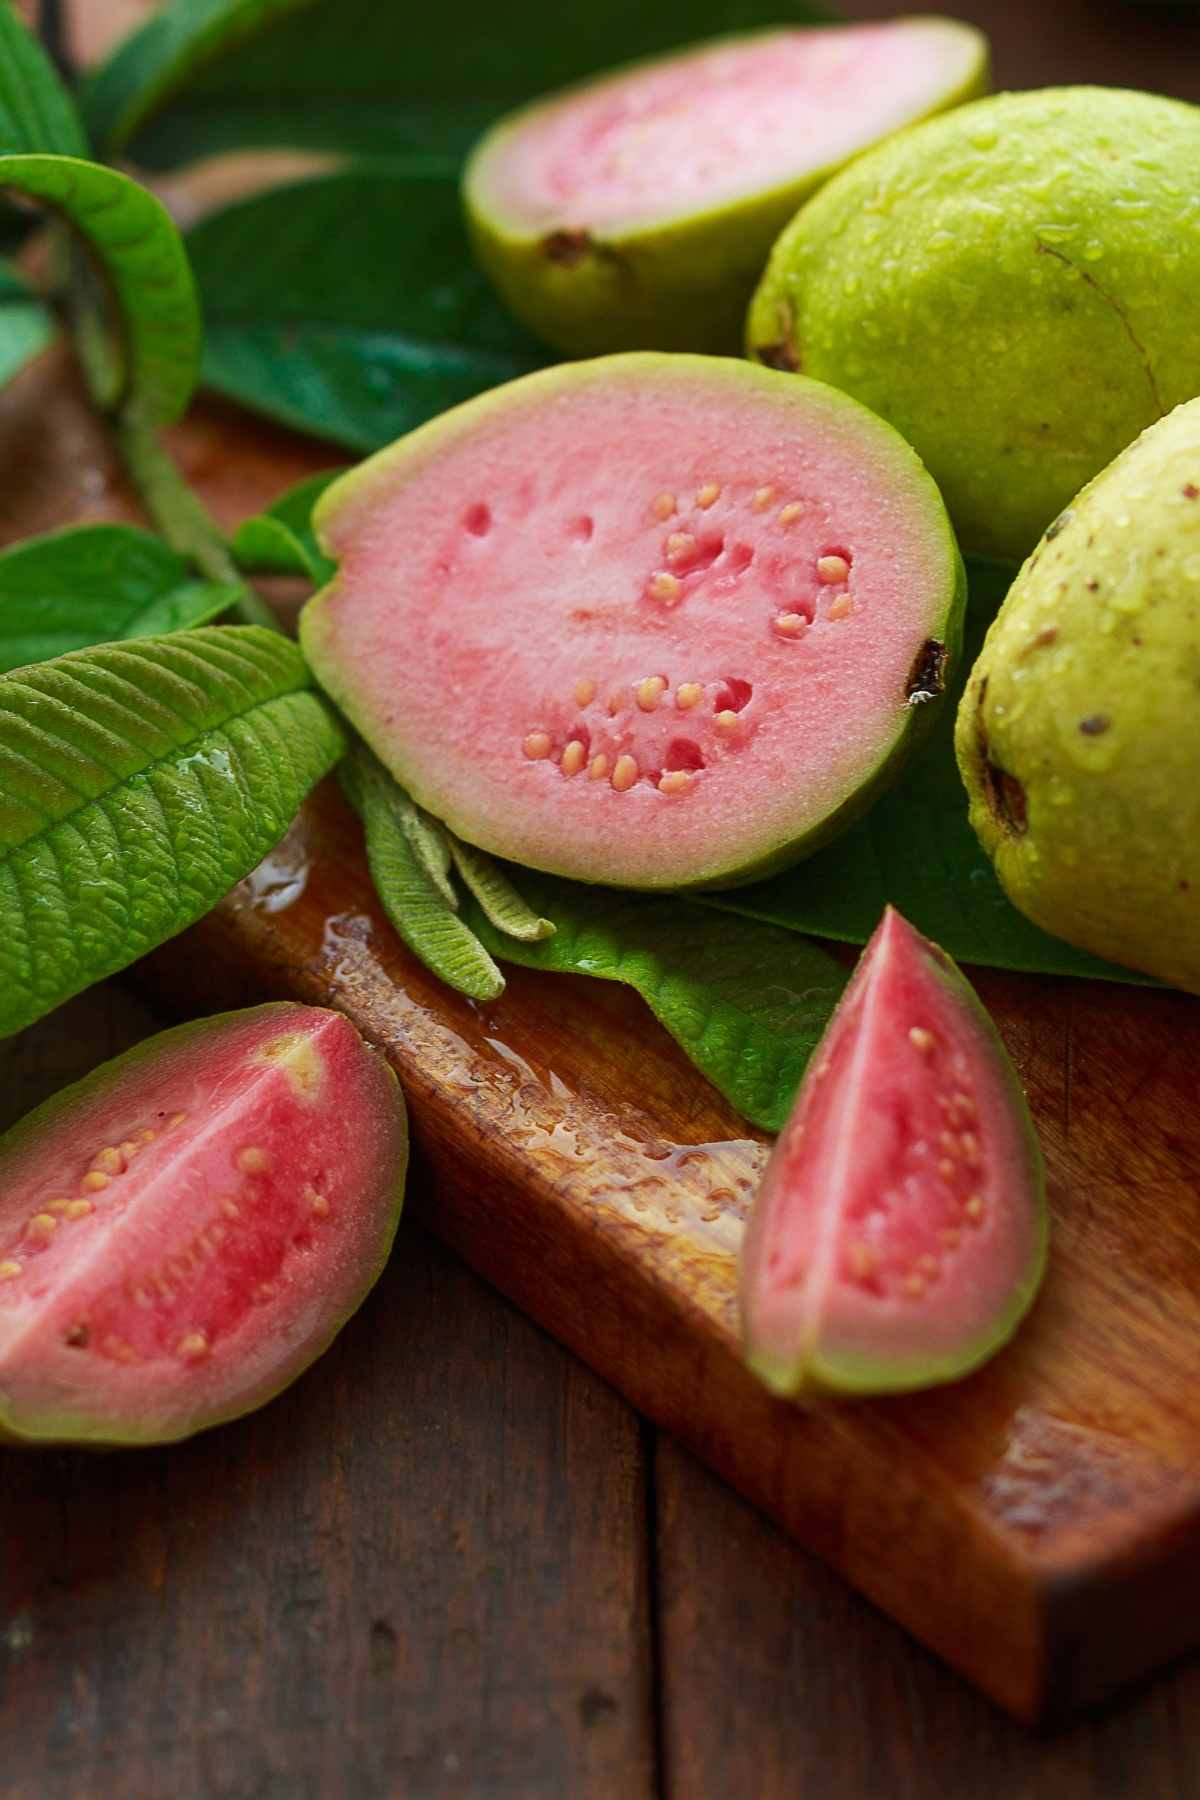 You may have heard of the guava fruit but do you really know what it is? This tropical fruit is very versatile and can be enjoyed in many different kinds of jams, desserts, and even BBQ sauce!